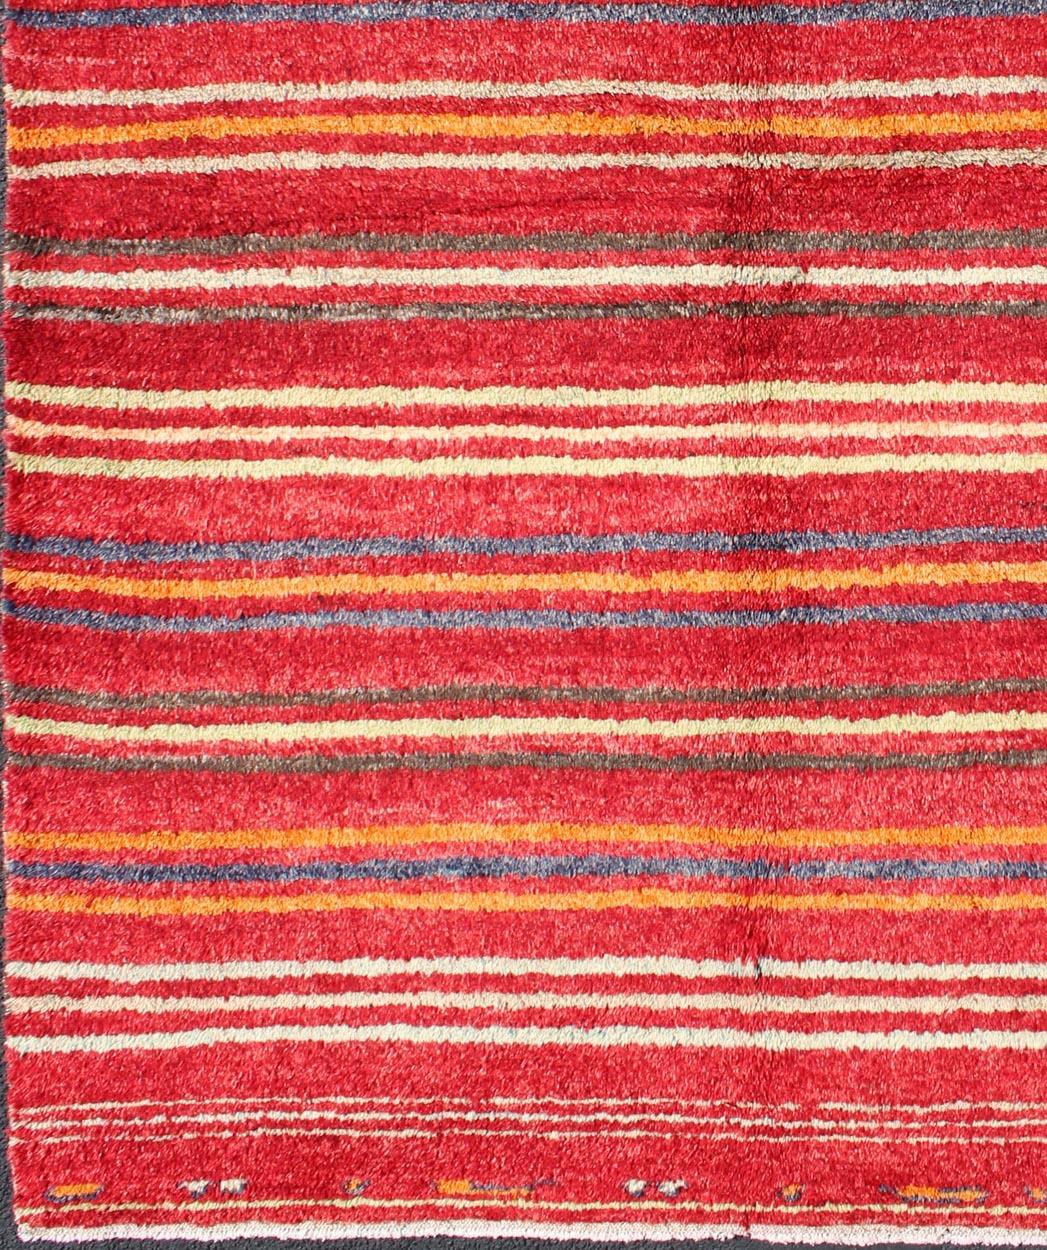 Striped Colored Tulu Carpet from Turkey in Blue, Green and Orange
rug/en-3271 Keivan Woven Arts / origin/turkey / mid-20th Century

This charming high-pile Tulu rug is handwoven from wool in a soft and colorful palette, featuring a striped pattern